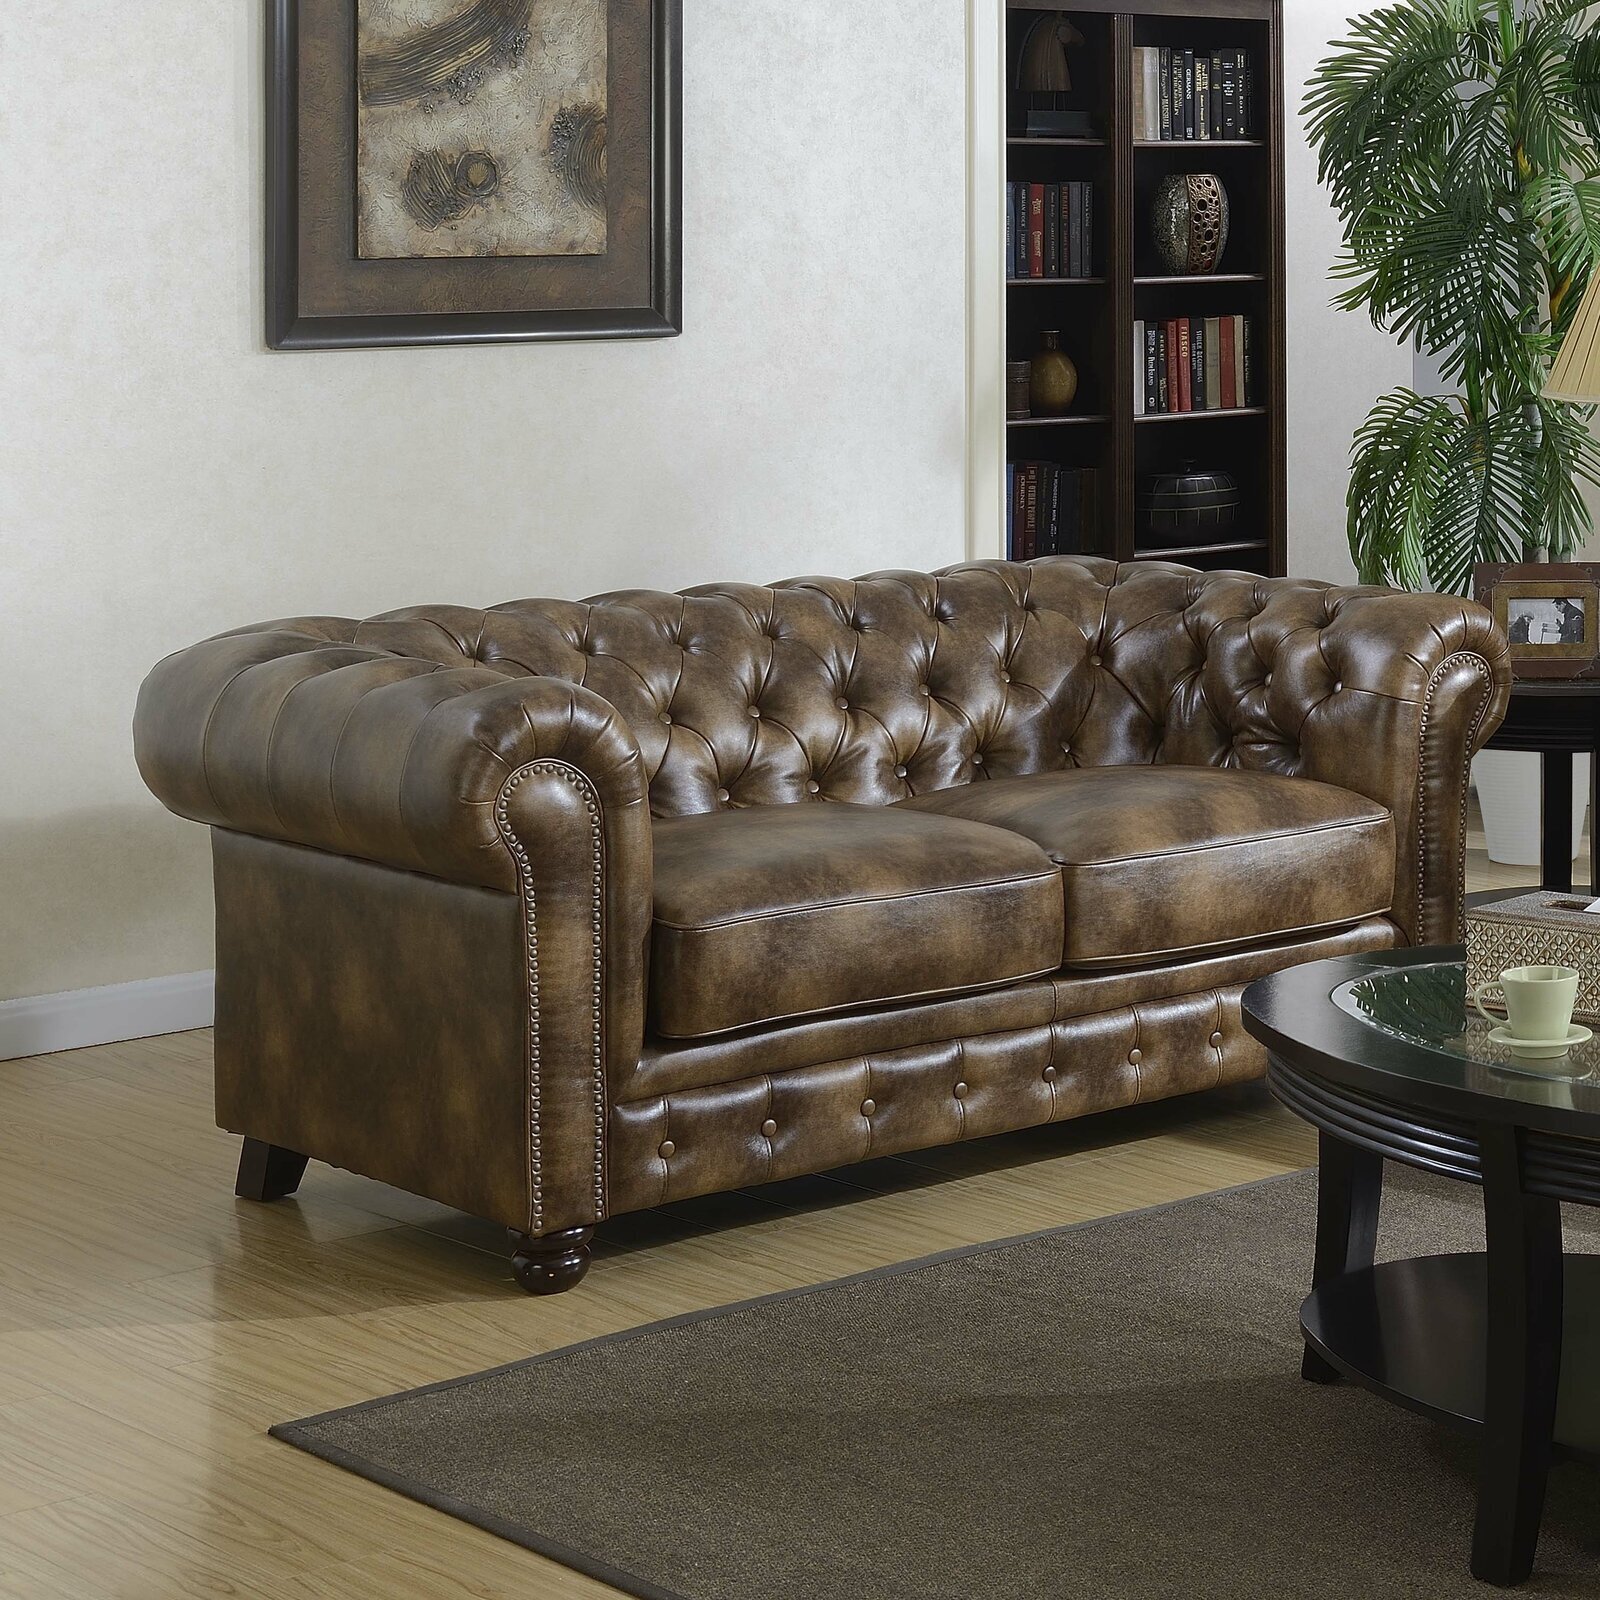 Masculine Traditional Chesterfield Leather Curved Sofa